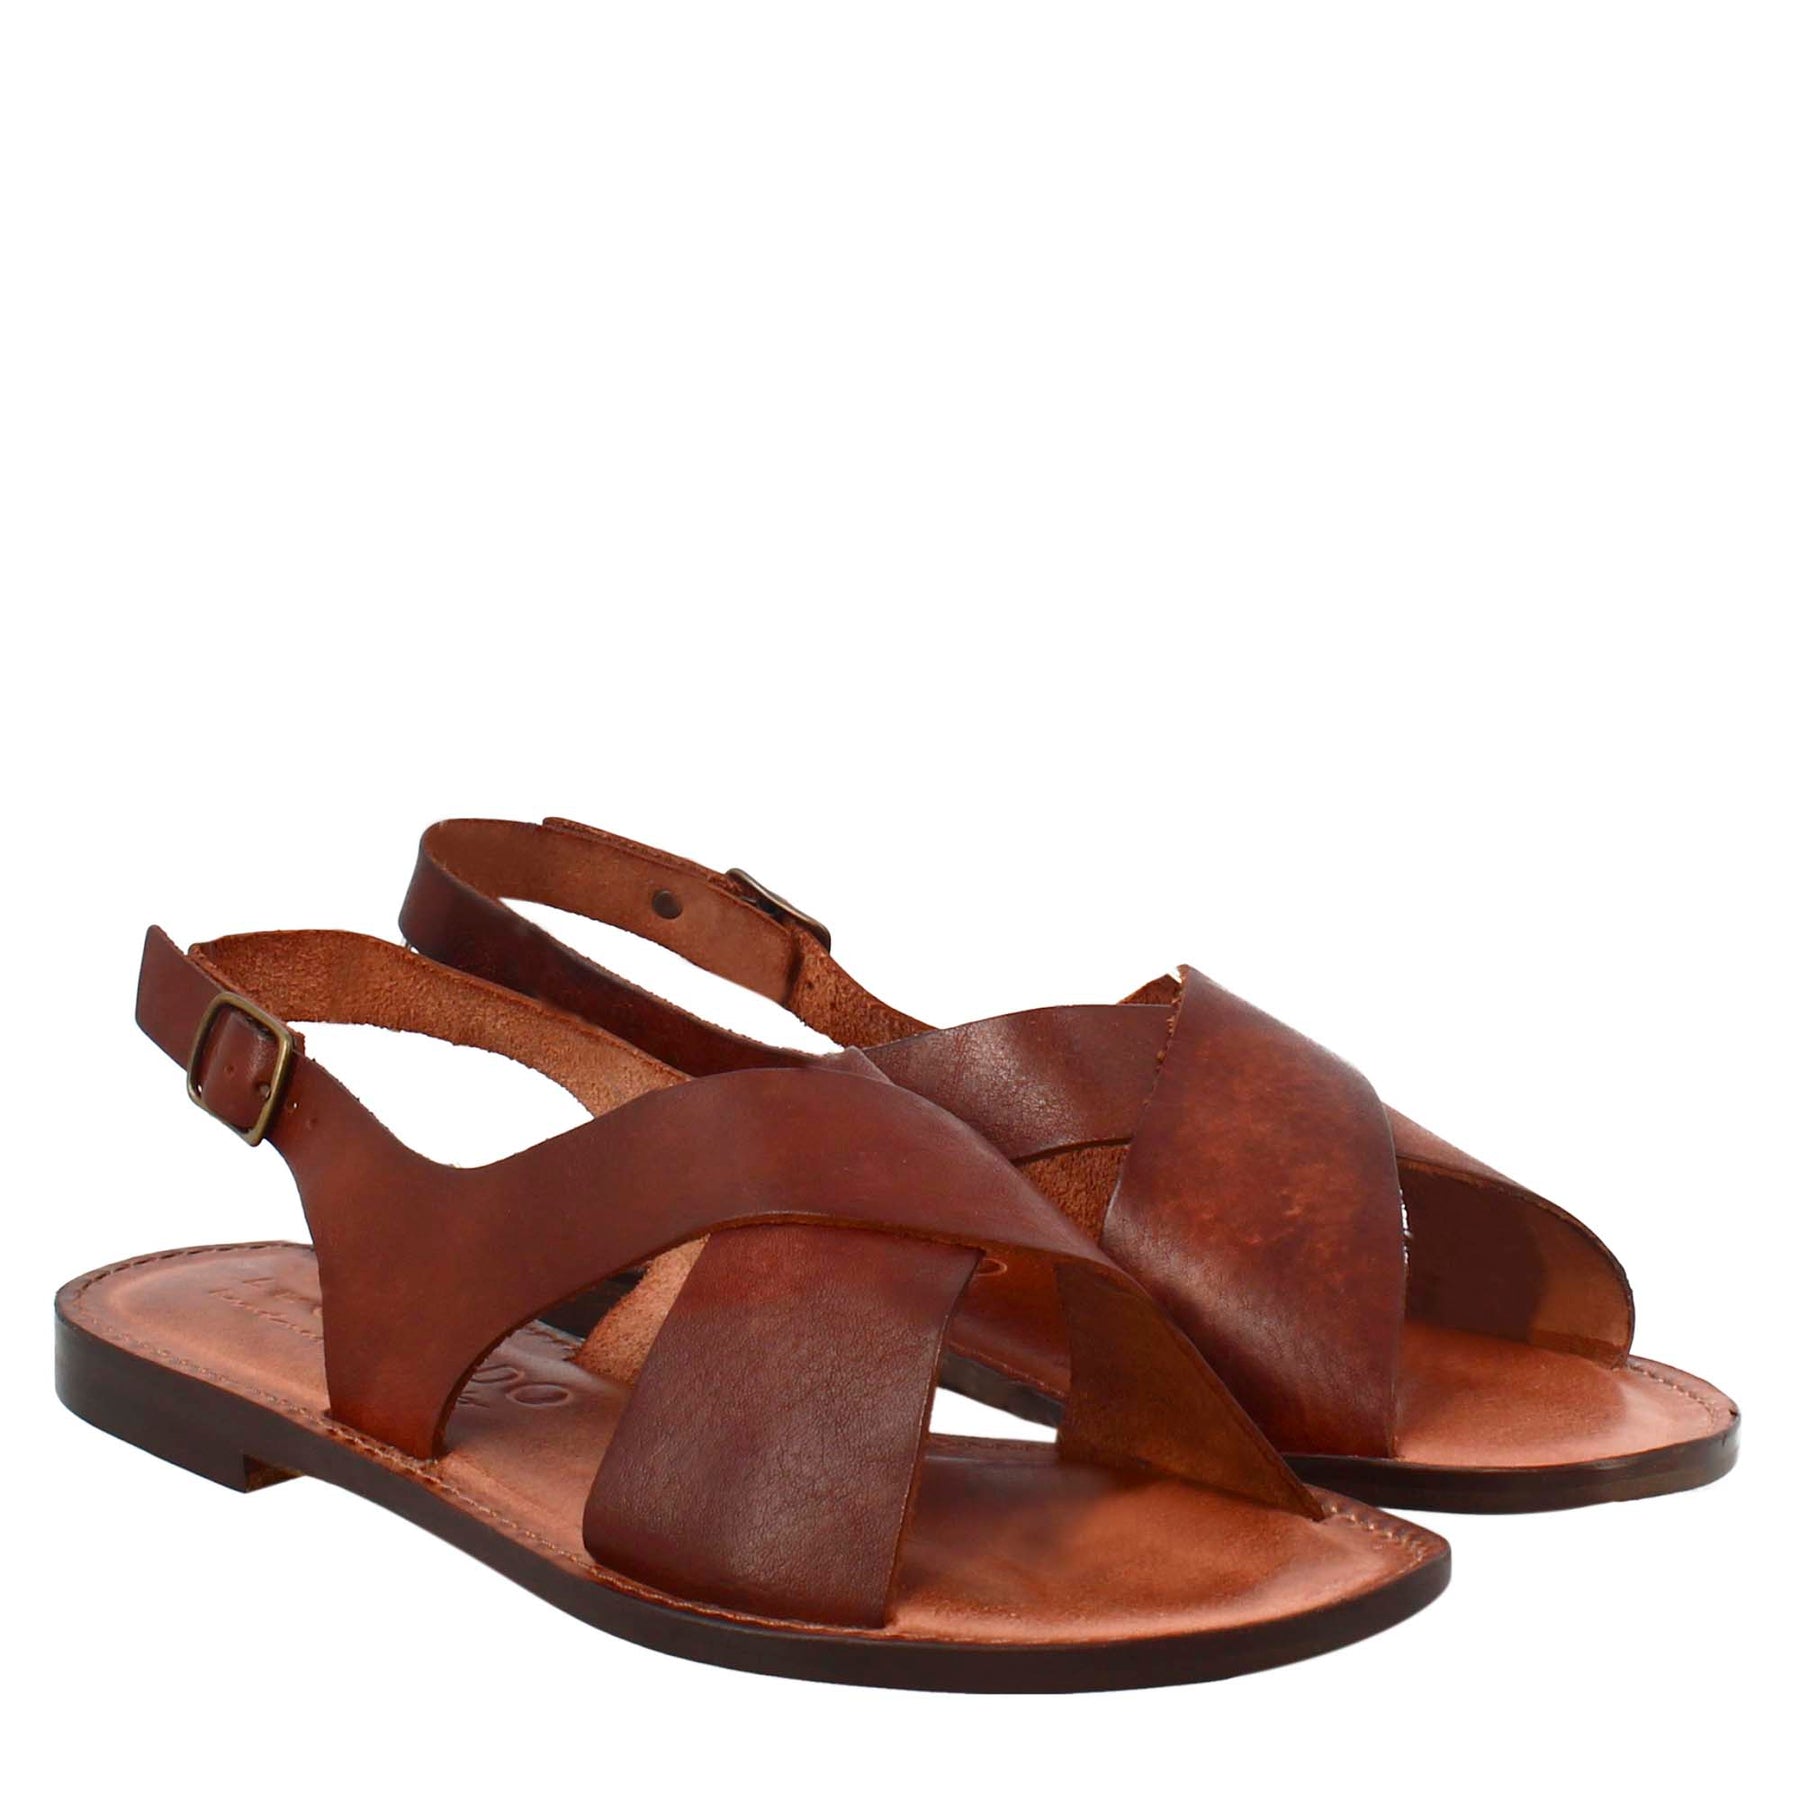 Ancient Roman style women's Arcadia sandals in brown leather 